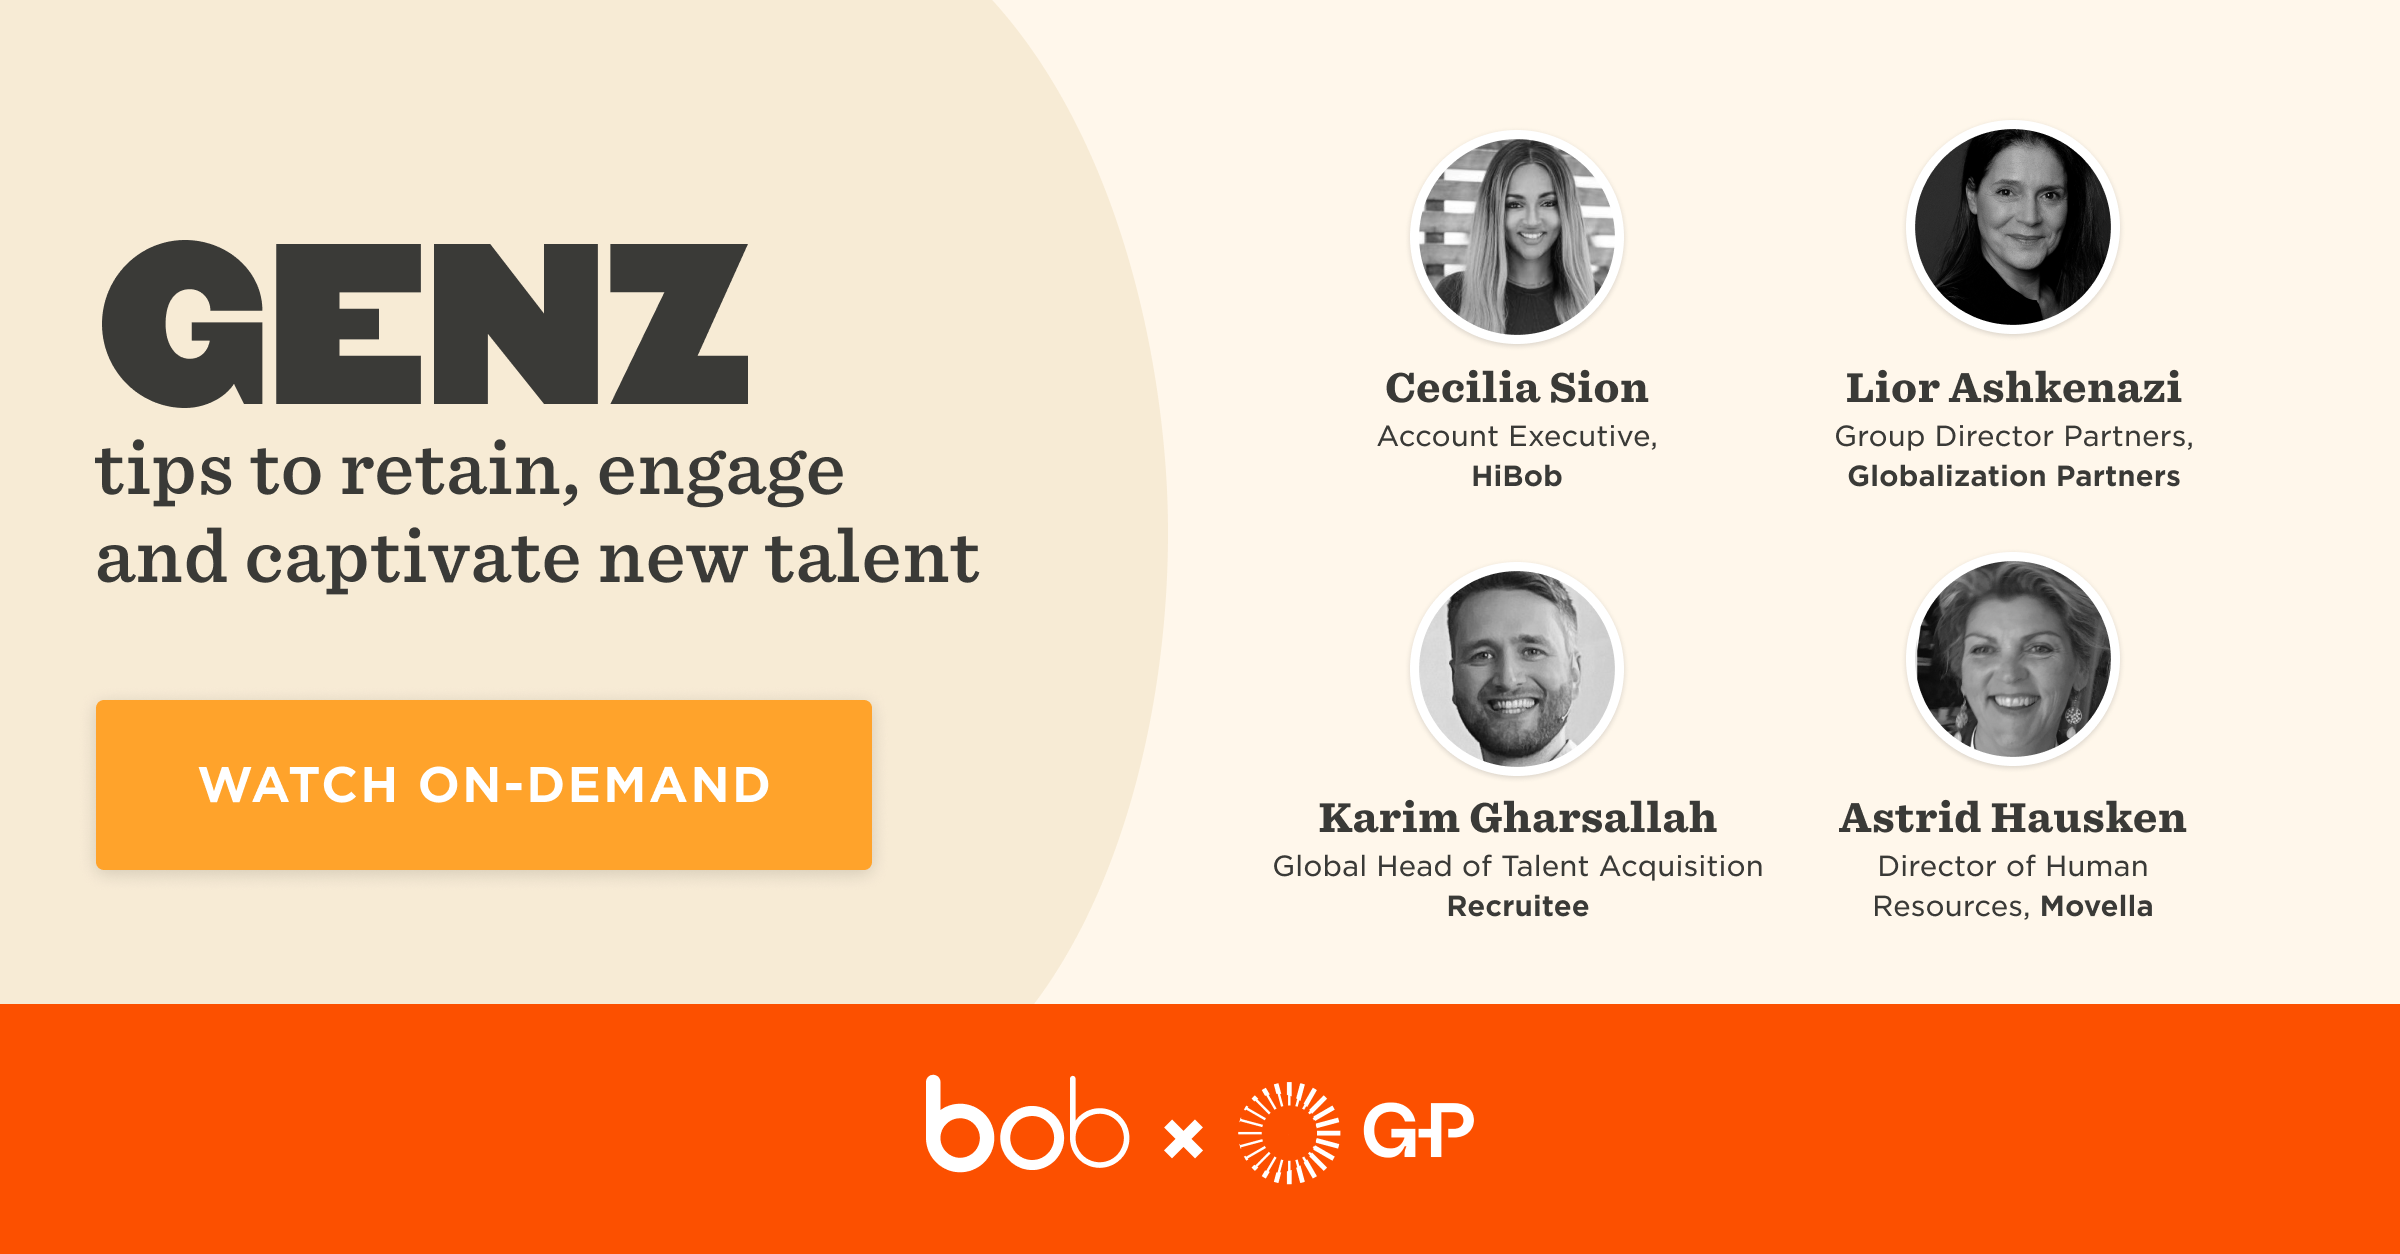 Watch on-demand: “Gen Z – tips to retain, engage, and captivate new talent” event - Post_event_Young-generation-in-tech_BNLX_-paid_ad_ENG_1200X627PX.png